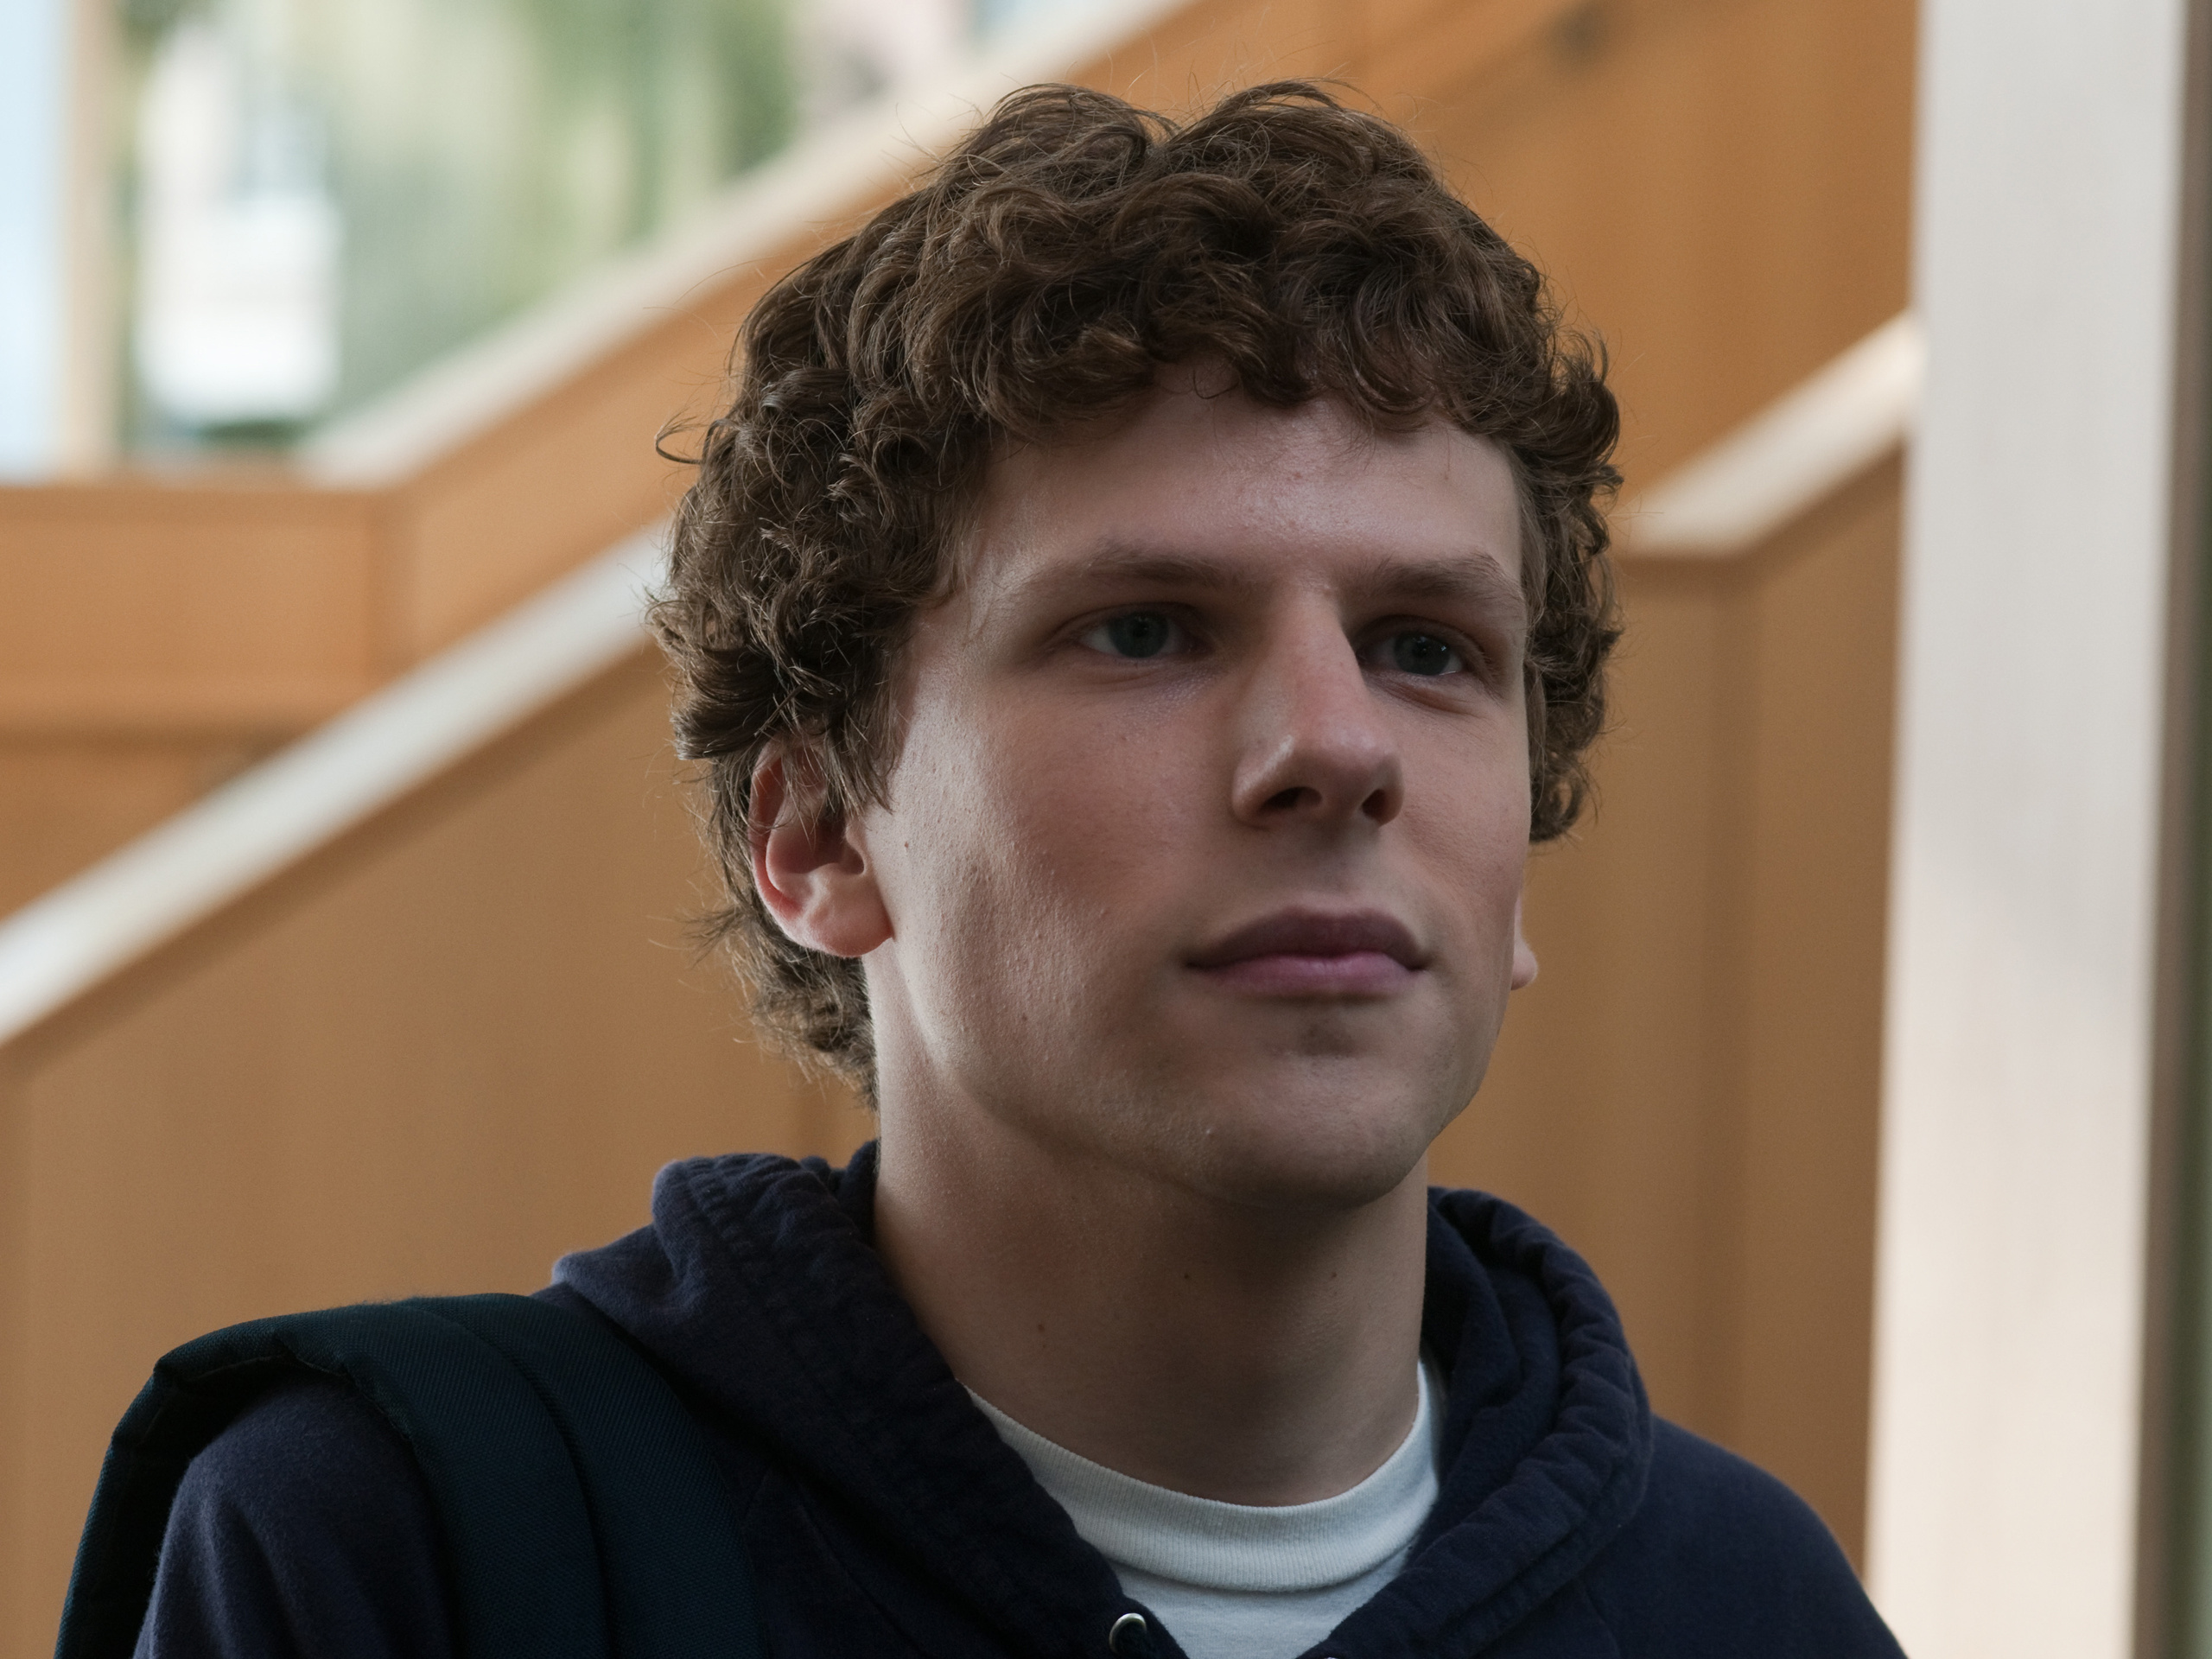 Jesse Eisenberg: Was cast as Walt Berkman in a 2005 comedy-drama film, The Squid and the Whale. 2560x1920 HD Wallpaper.